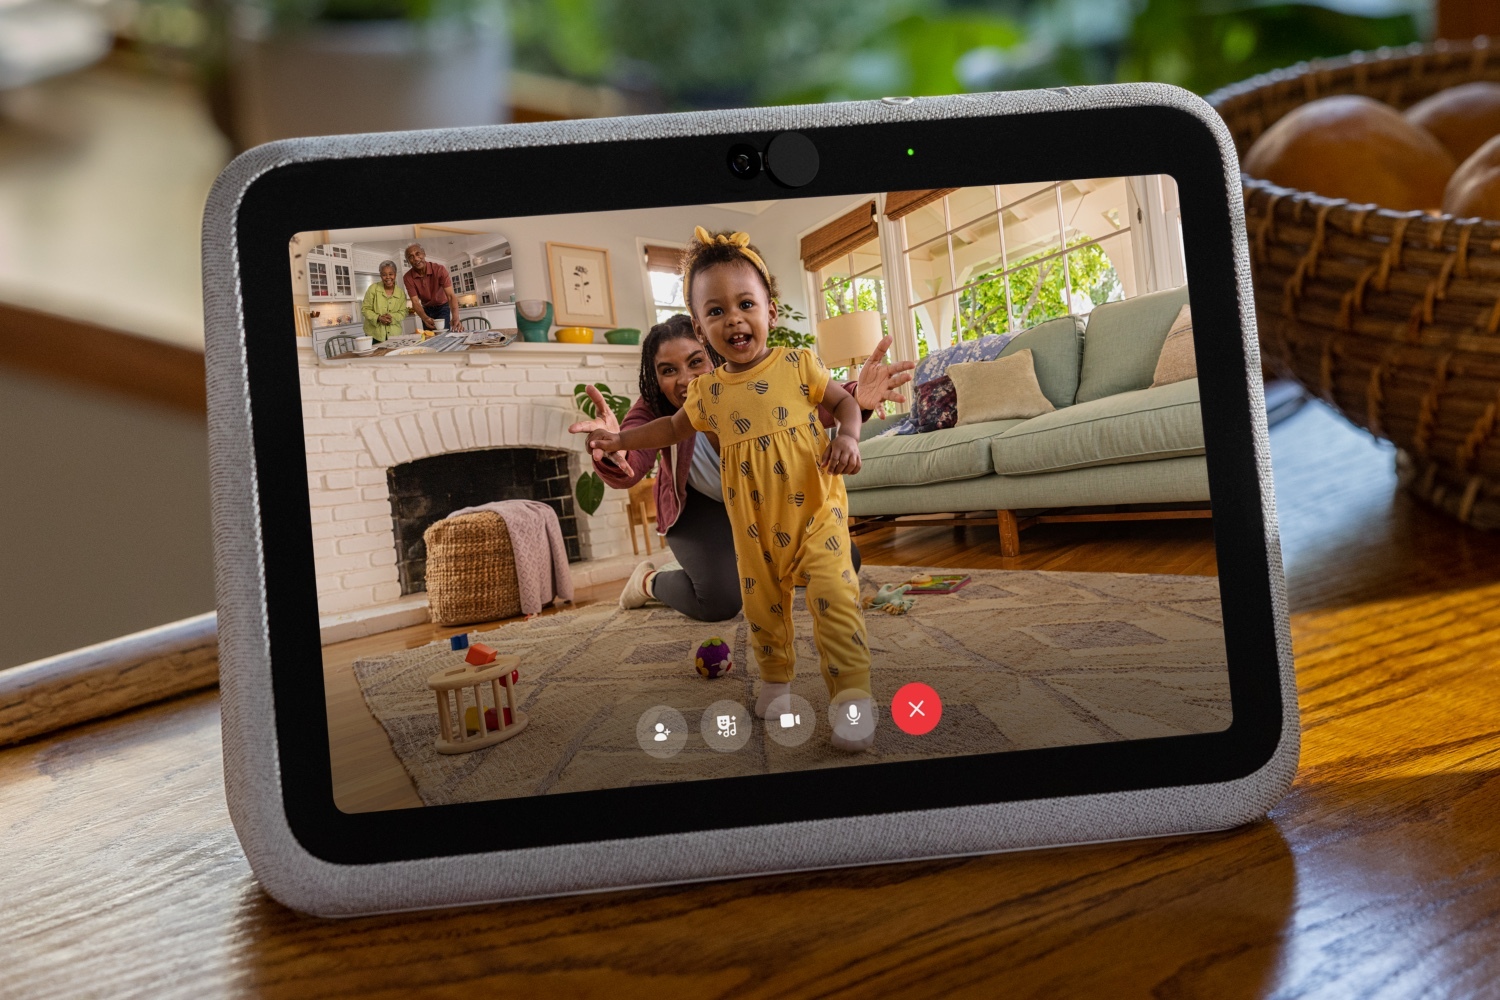 Facebook selling Alexa smart screen ‘you carry around and TALK to’ – and it films you with a camera